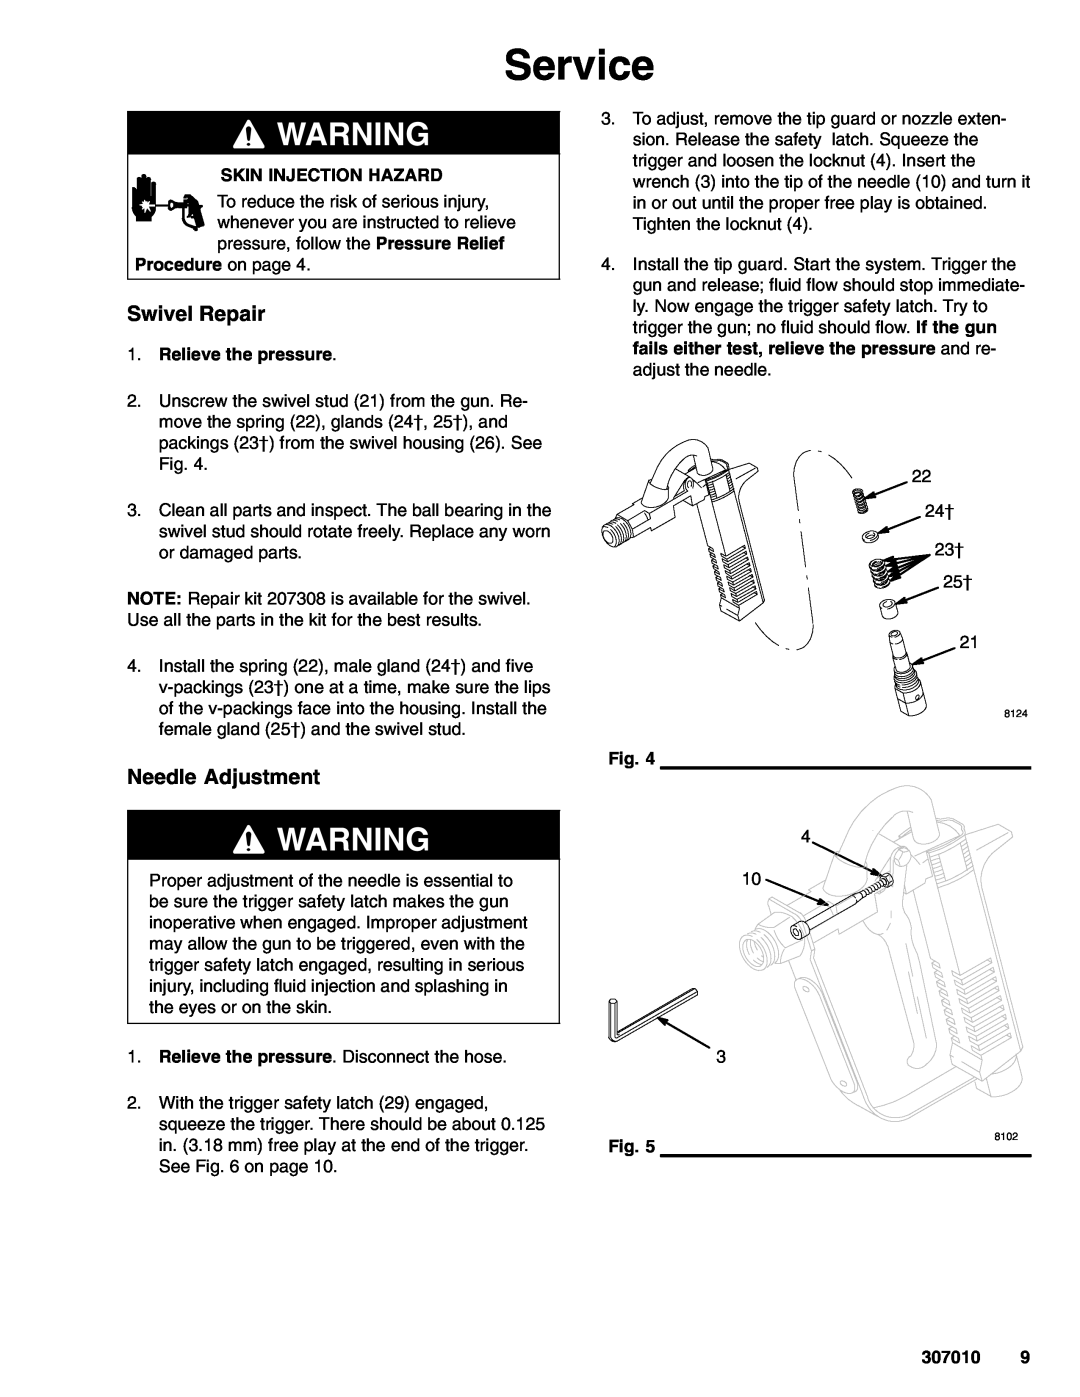 Graco Inc 208008, 307010L important safety instructions Service, Swivel Repair, Needle Adjustment 